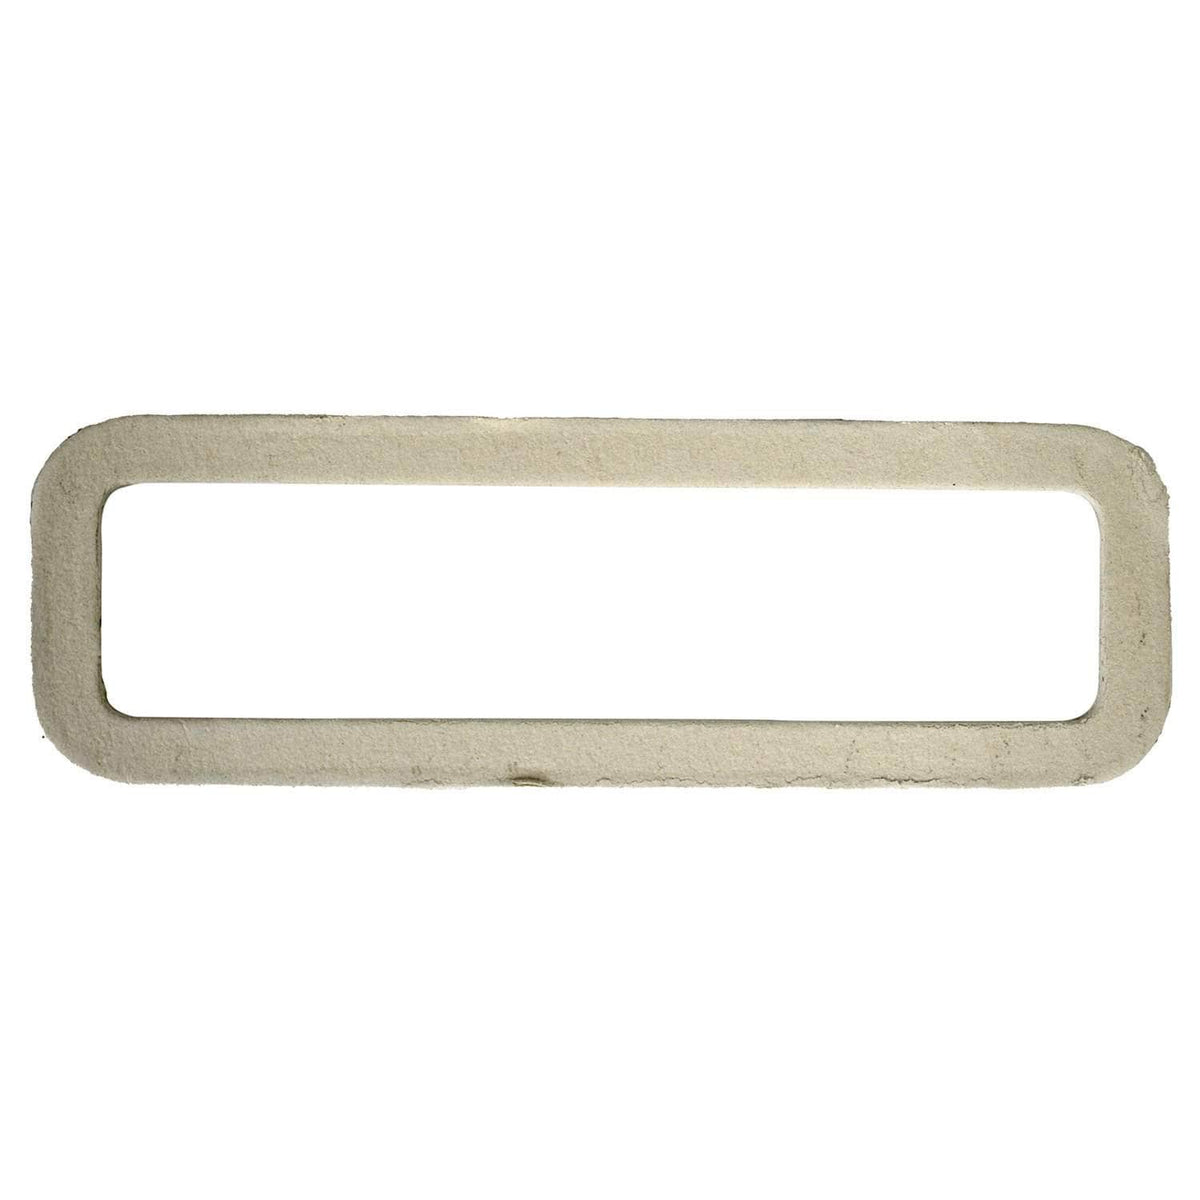 Barrel gasket for use with Aga range cookers